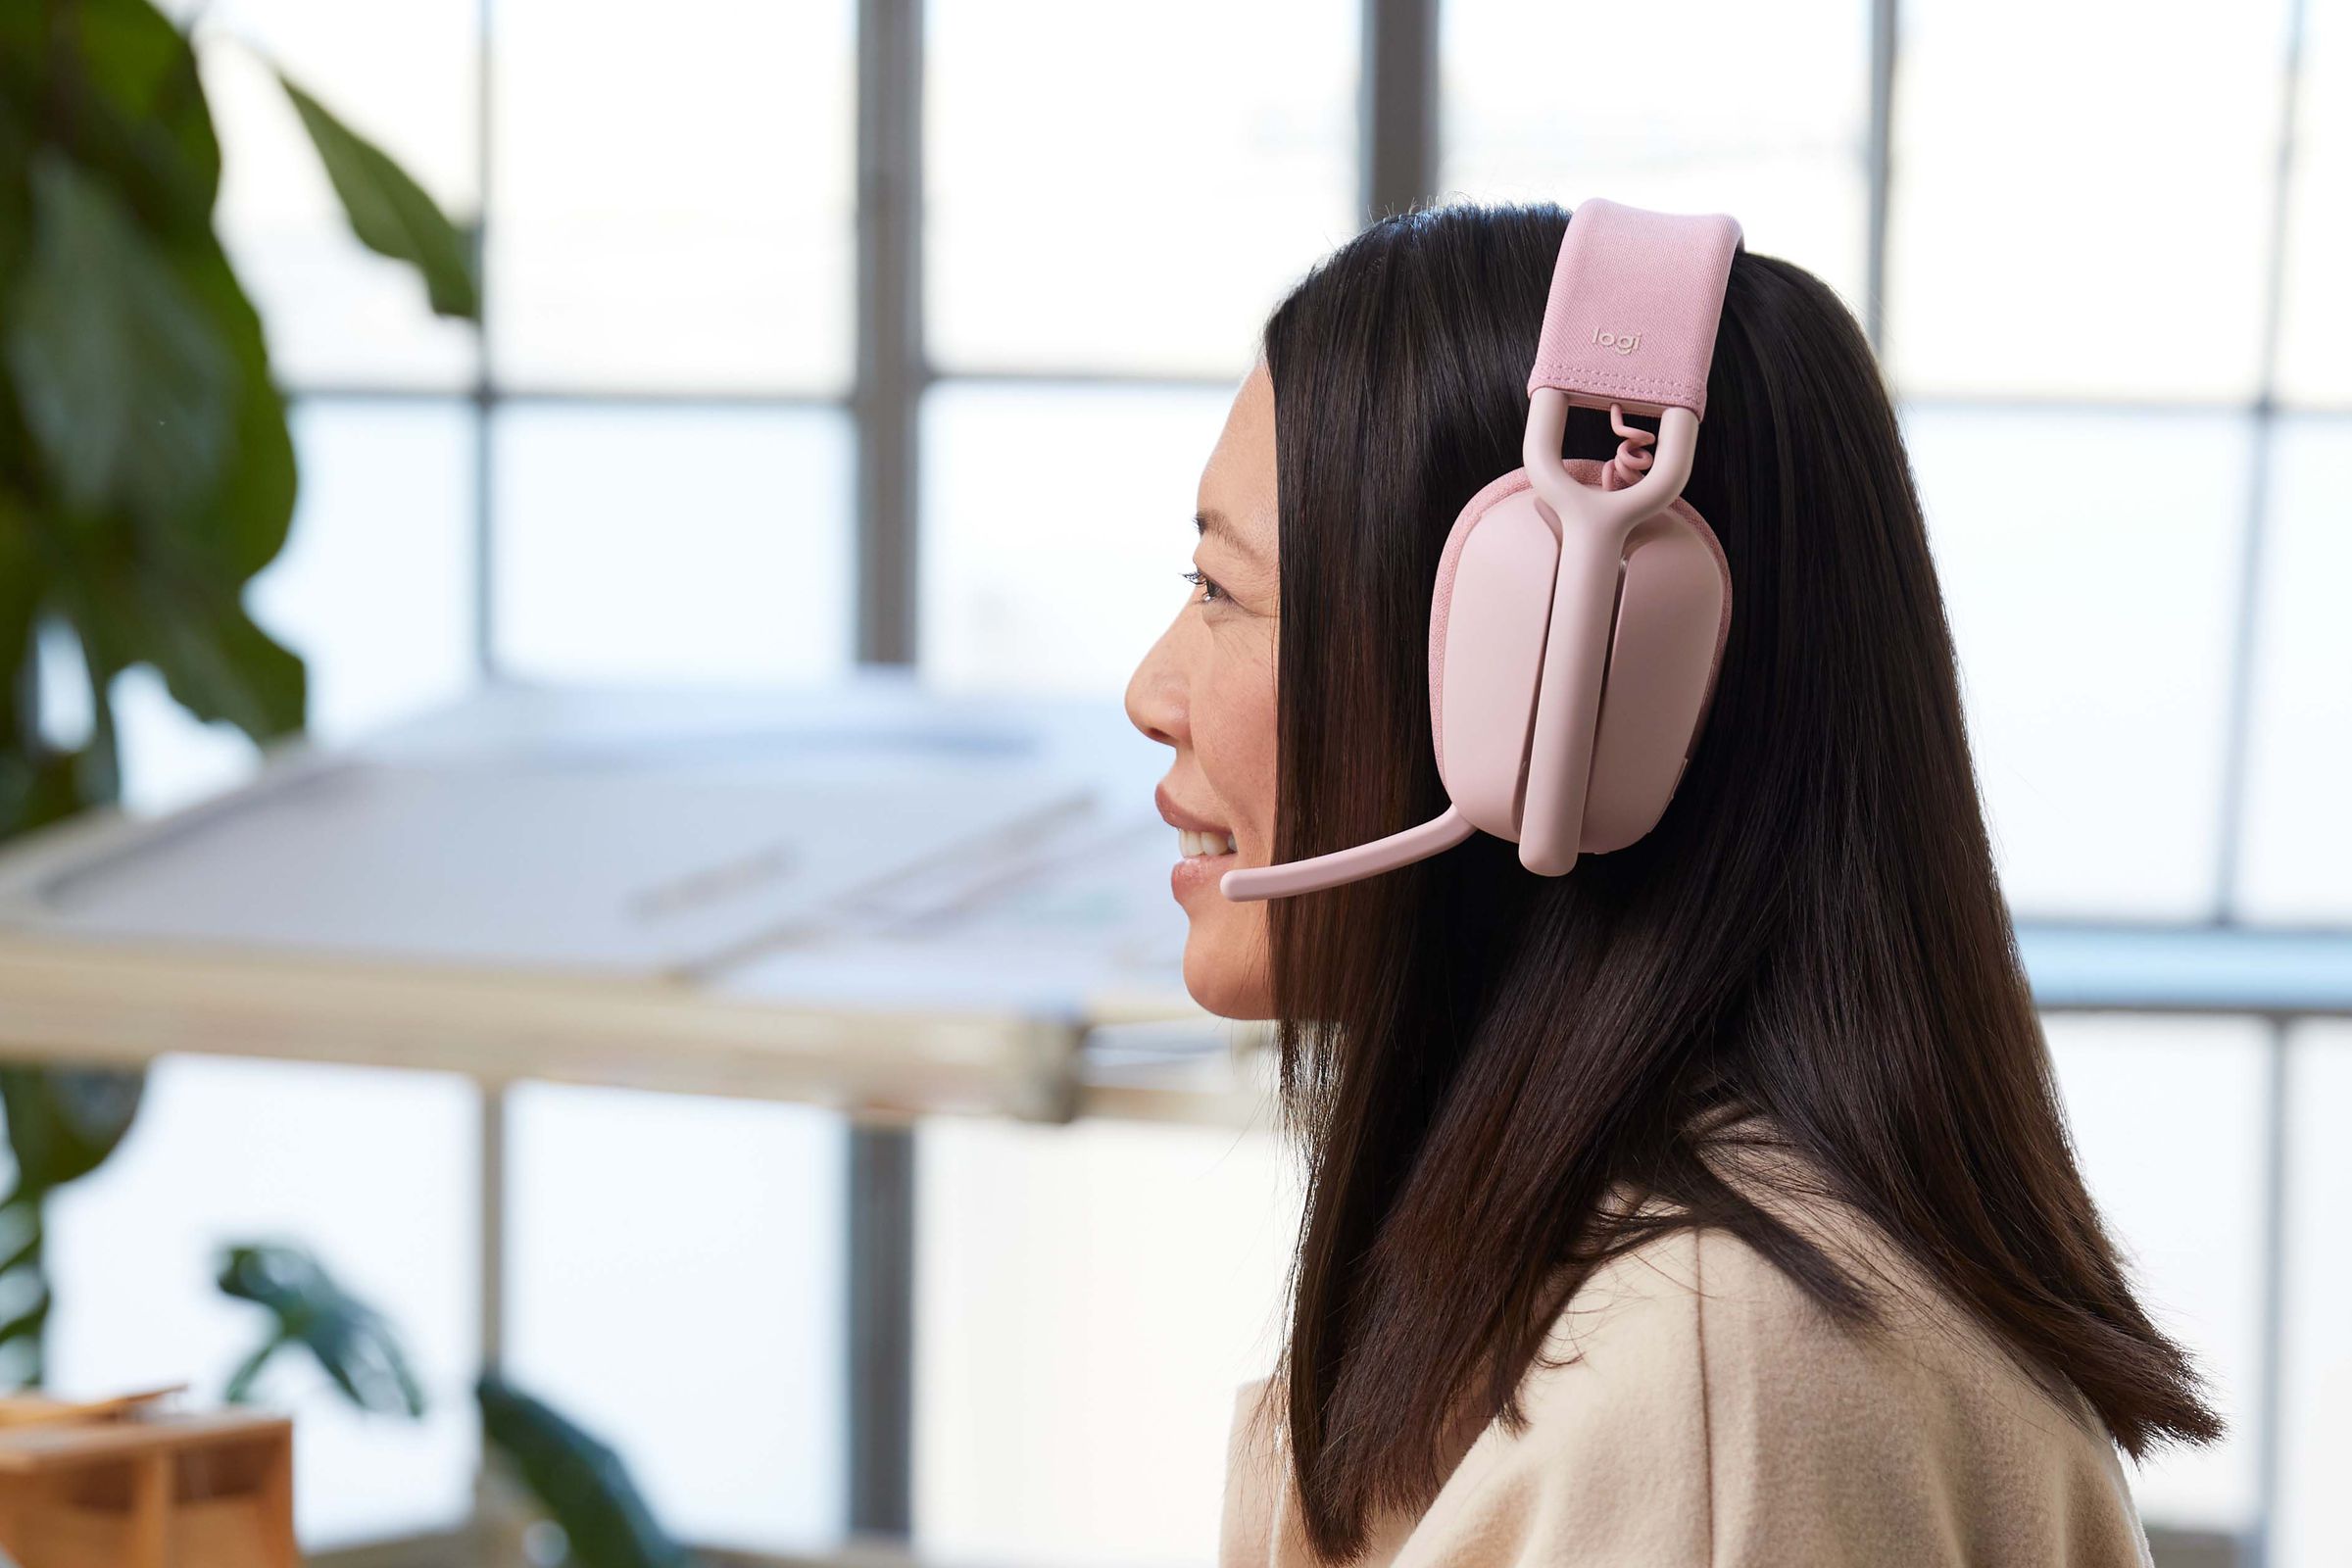 A person using the Zone Vibe 100 headset.